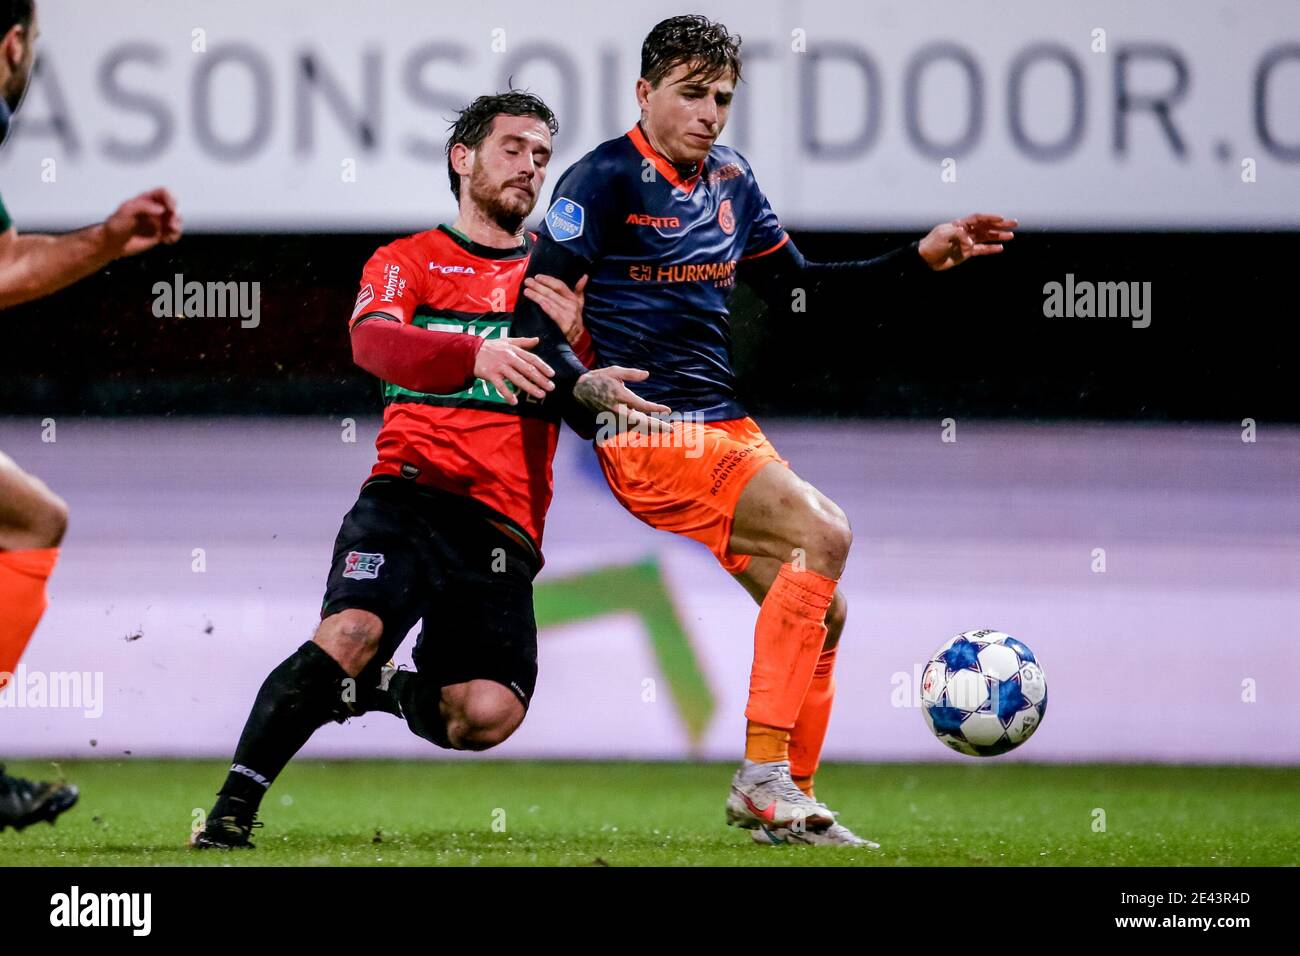 NIJMEGEN, NETHERLANDS - JANUARY 21: (L-R): Jordy Bruijn of NEC, Lazaros Rota of Fortuna Sittard during the Dutch KNVB Cup match between NEC and Fortun Stock Photo